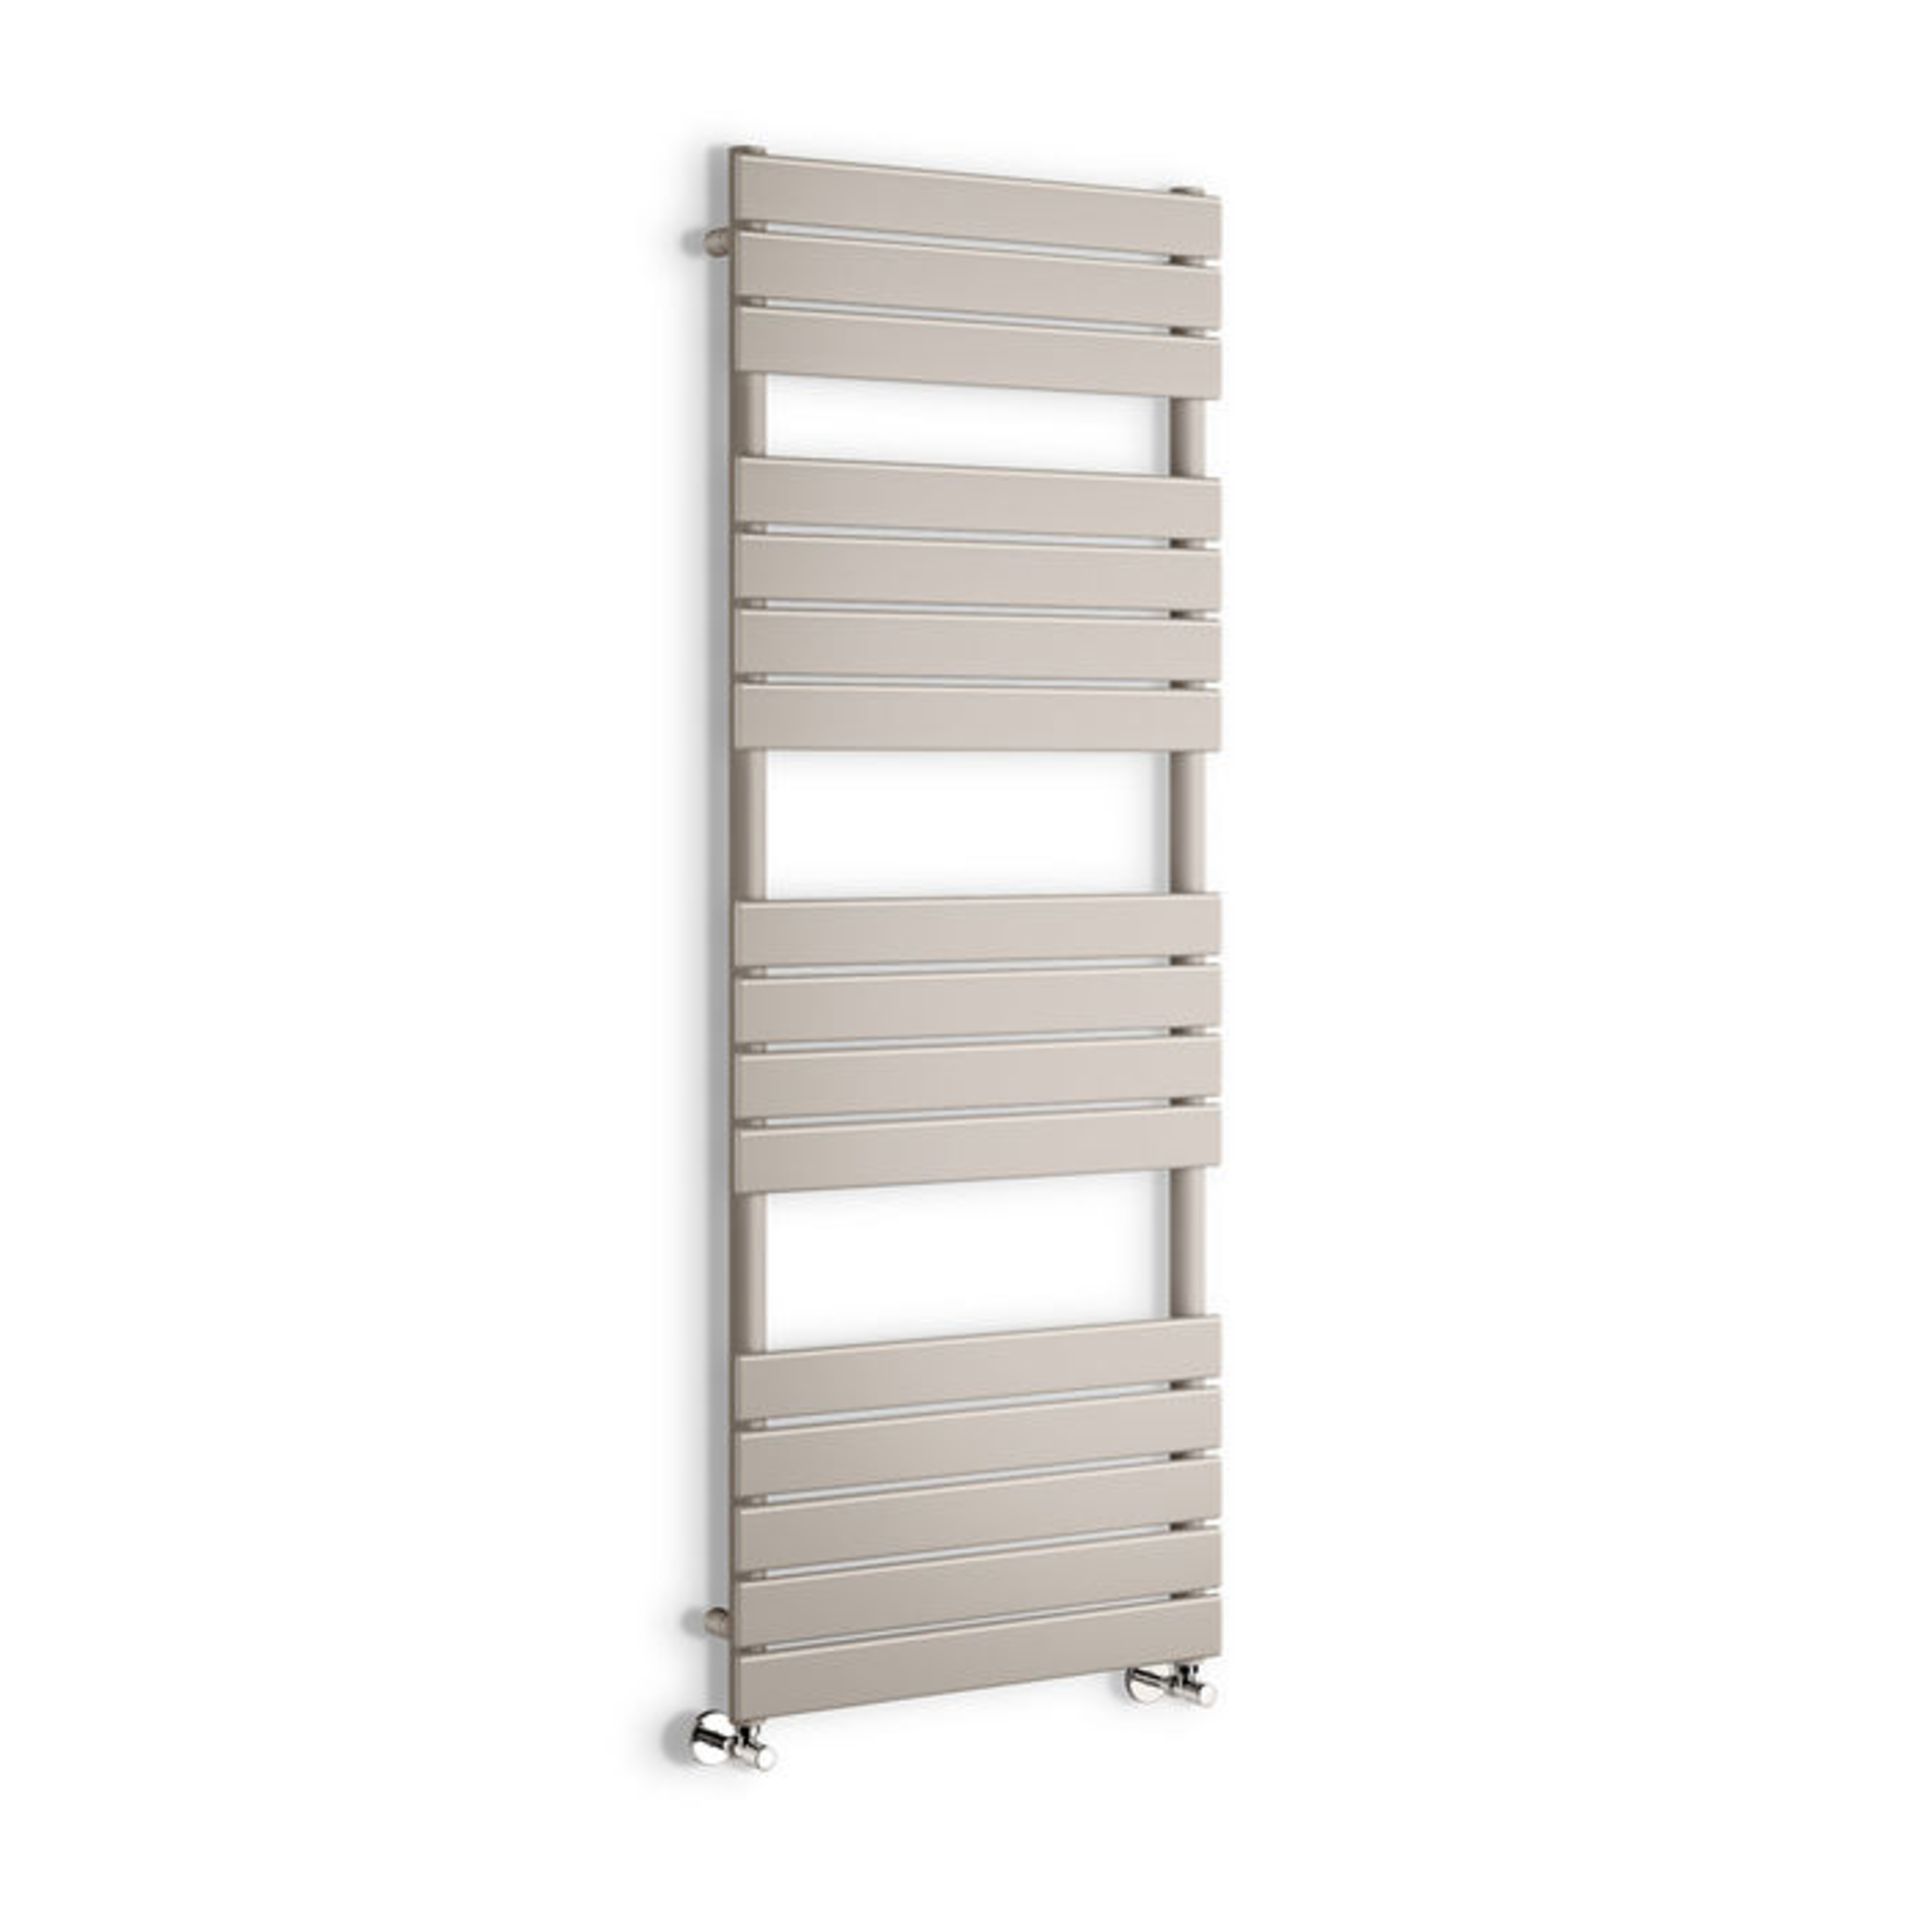 (W220) 1600x600mm Latte Flat Panel Ladder Towel Radiator. Made from high quality low carbon steel - Image 3 of 3